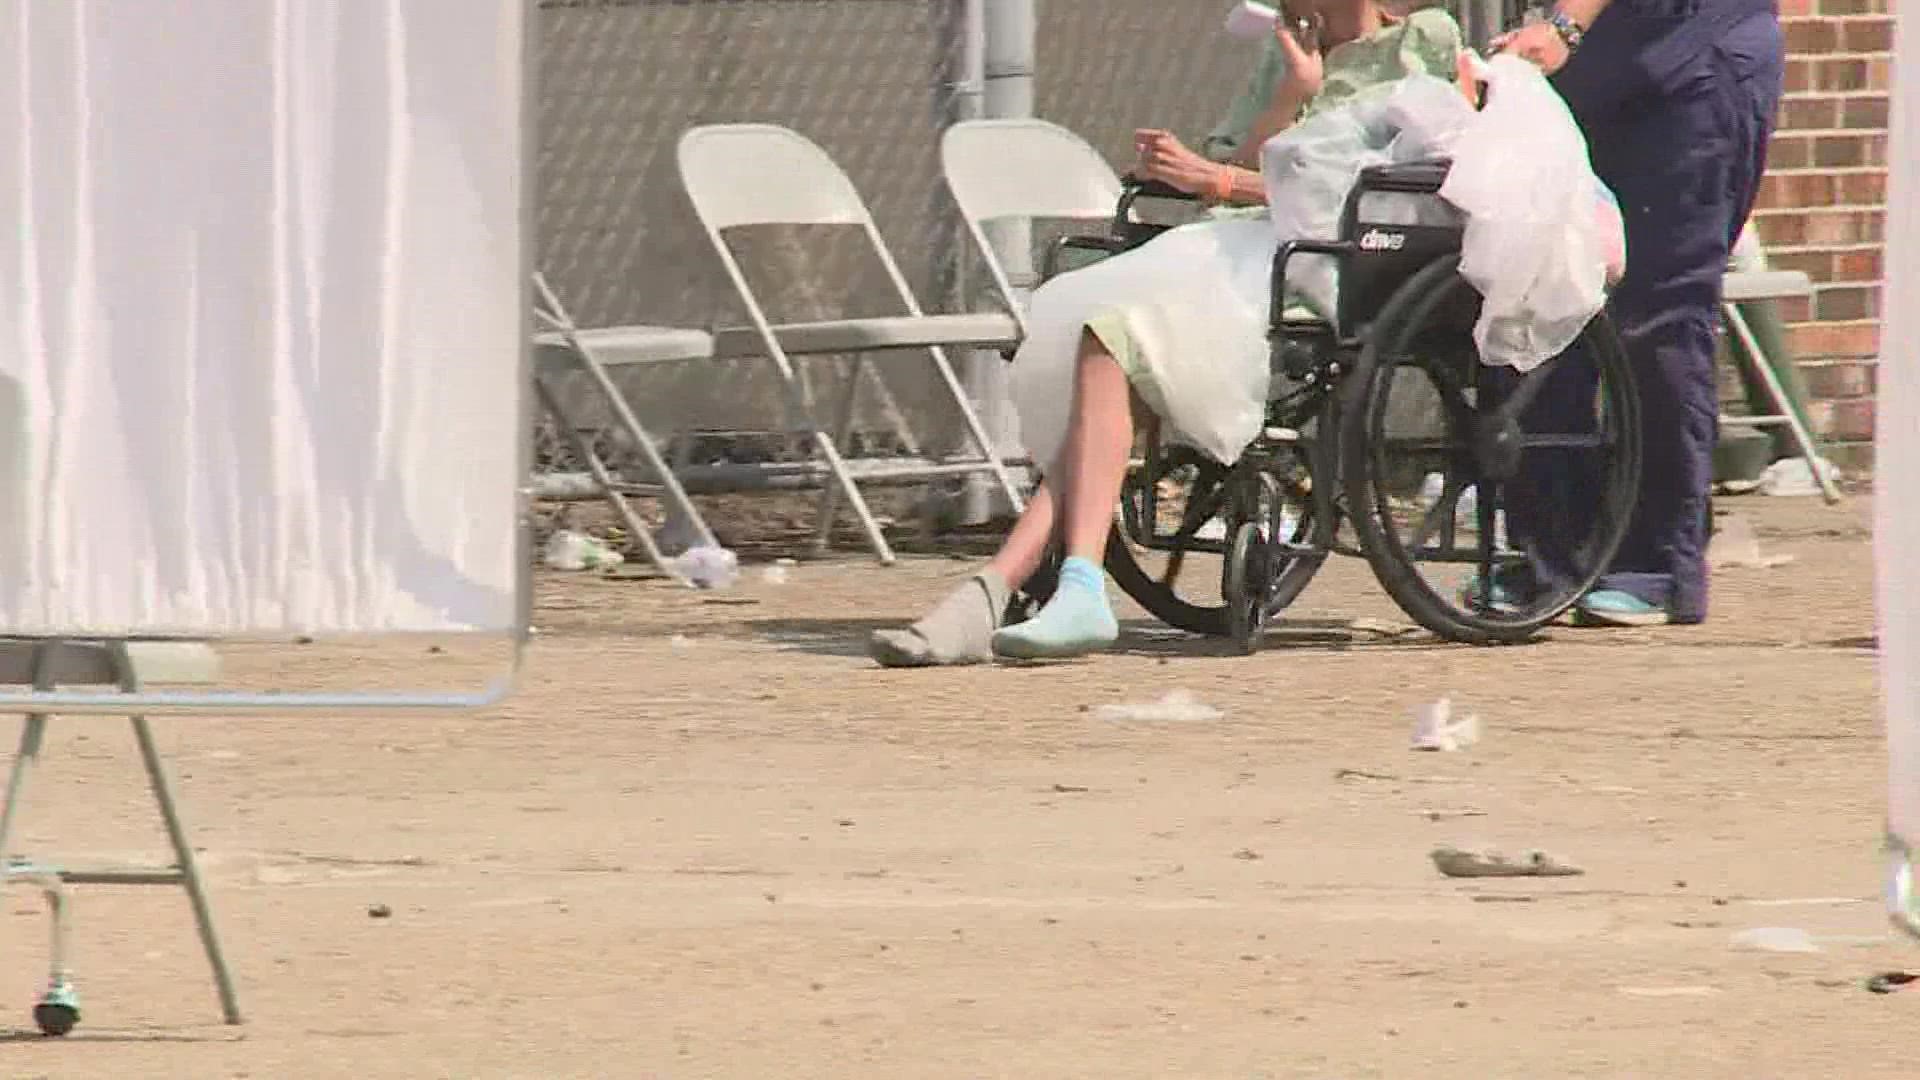 The housing of hundreds of nursing home residents is being investigated after four people die while evacuated. Conditions were described as sad.